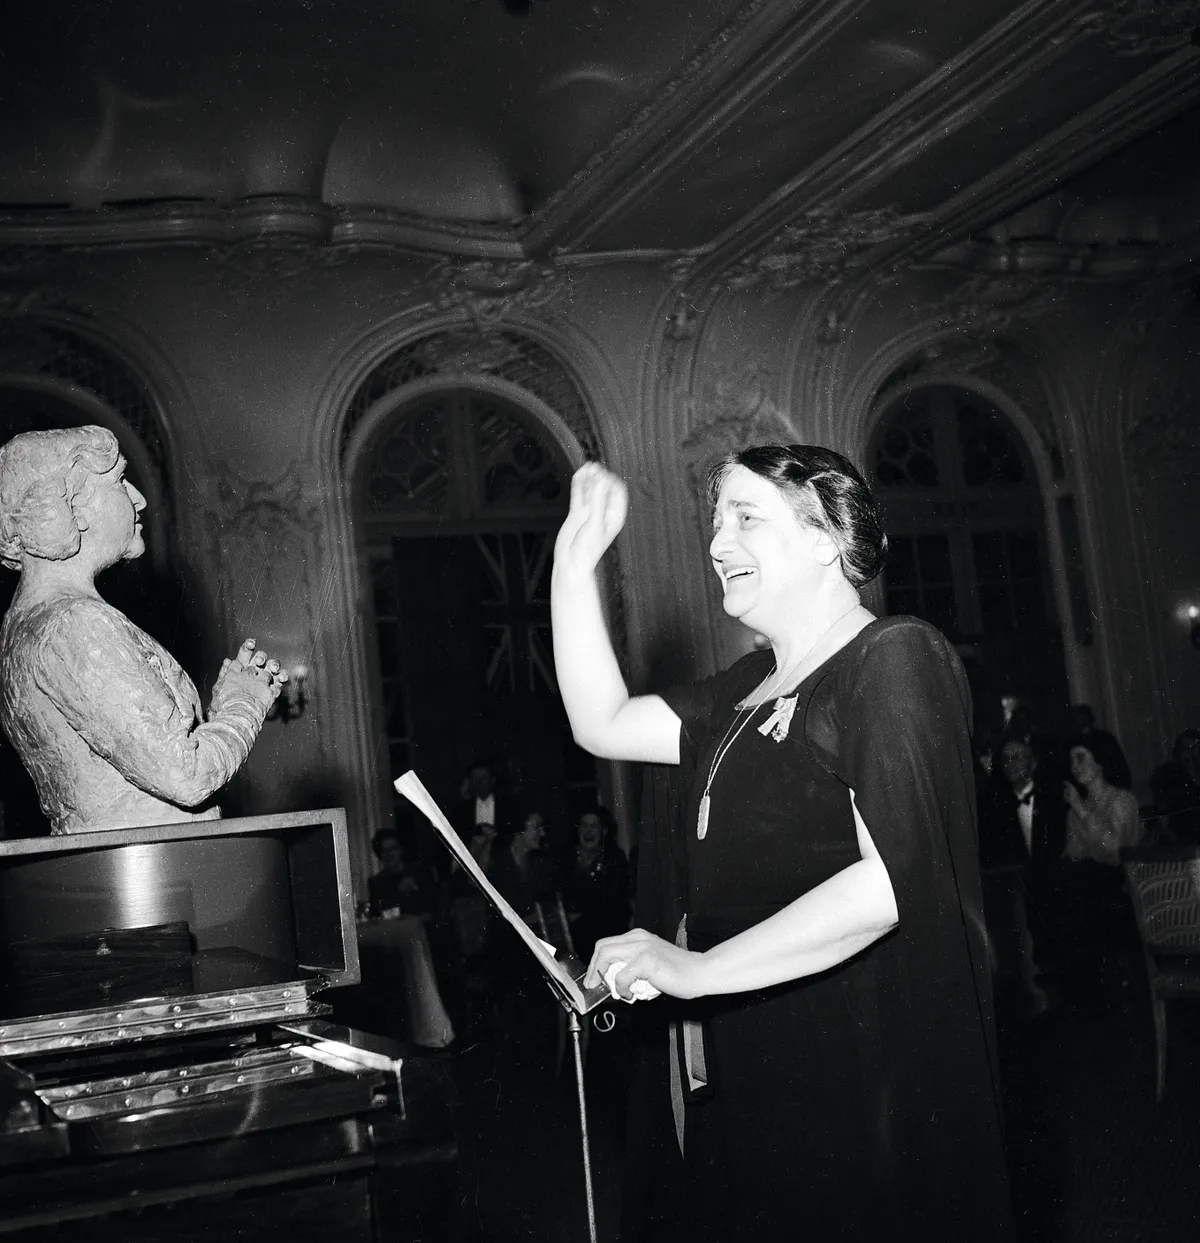 British pianist Dame Myra Hess (1890 - 1965) conducts Haydn's'Toy Symphony' of toy musical instruments at the National Gallery, London, 14th July 1945. On the left is a new bust of Hess by Jacob Epstein. Original publication: Picture Post - 2031- Toy Symphony - pub. 1950 (Photo by Jack Esten/Hulton Archive/Getty Images)